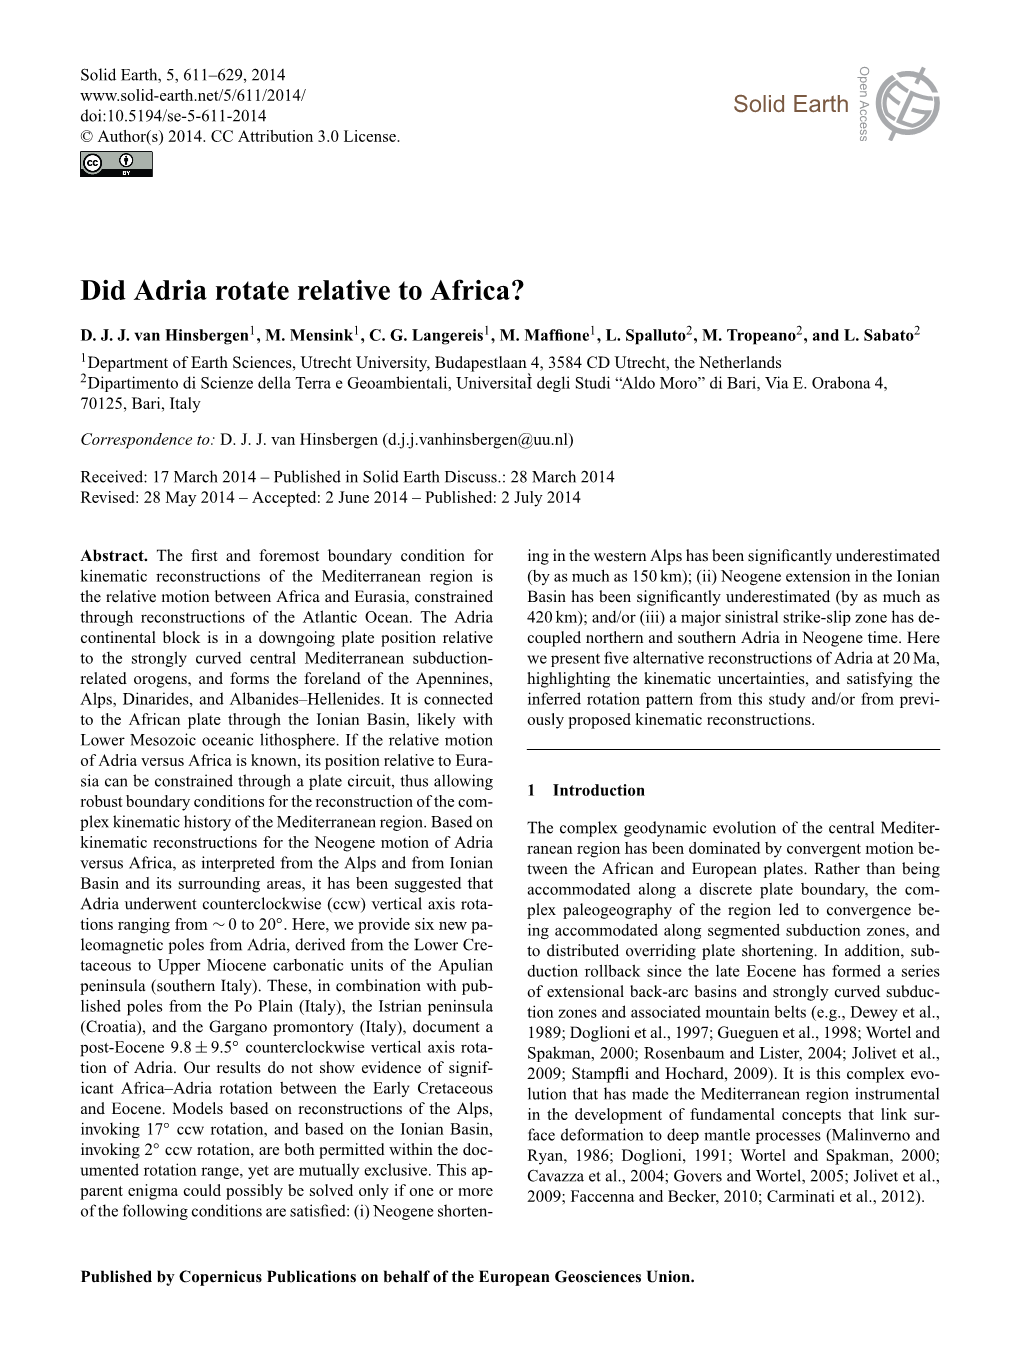 Did Adria Rotate Relative to Africa?